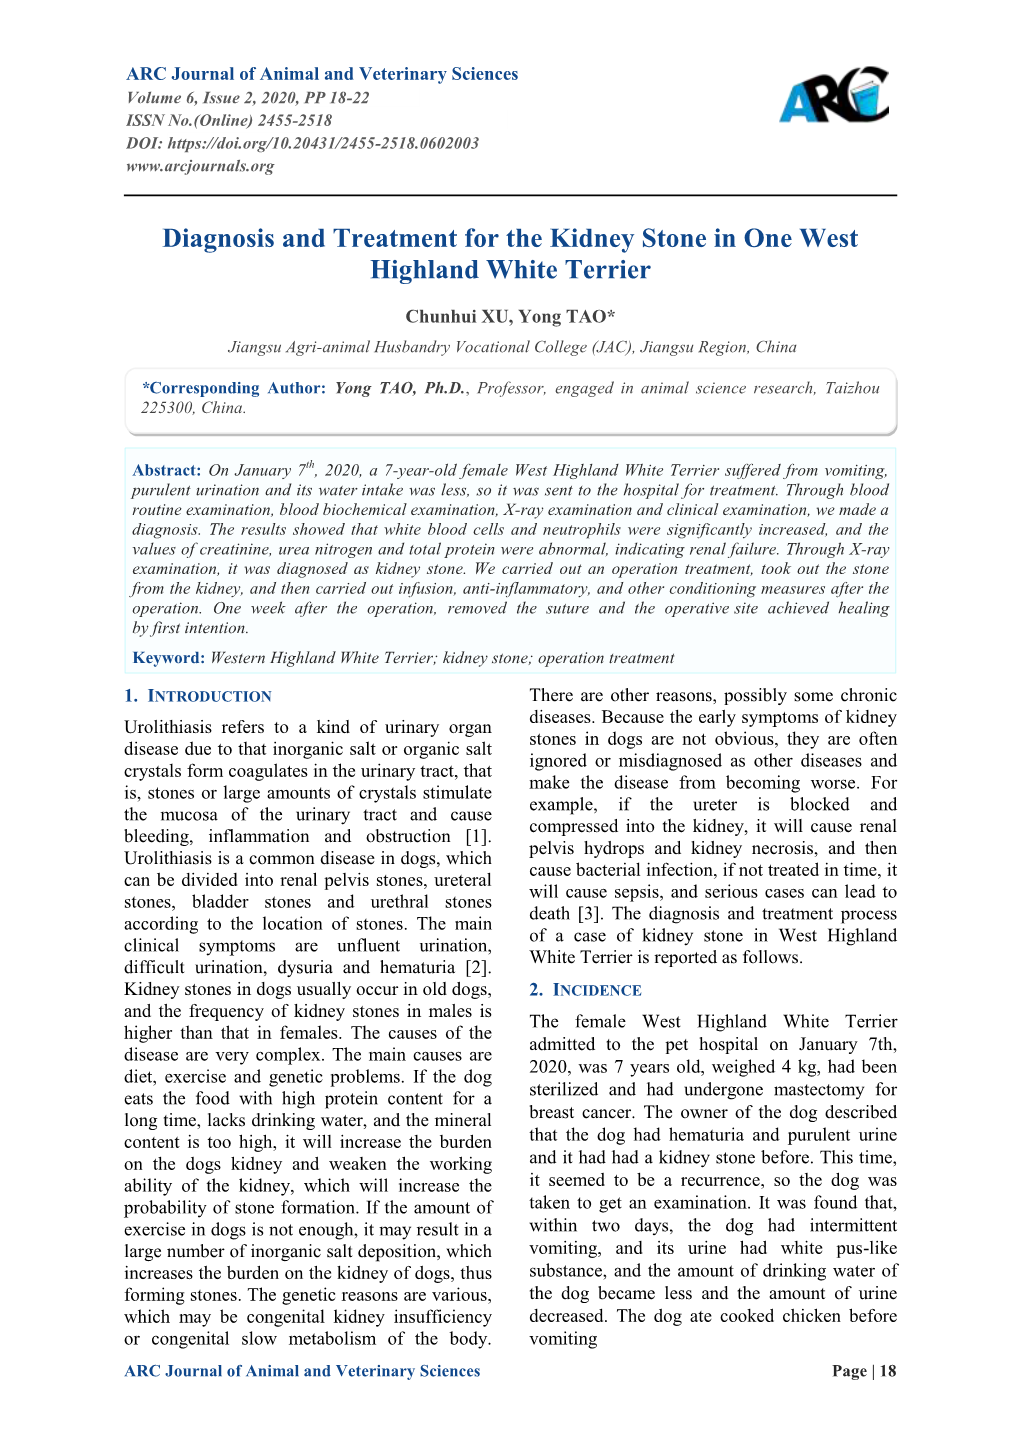 Diagnosis and Treatment for the Kidney Stone in One West Highland White Terrier